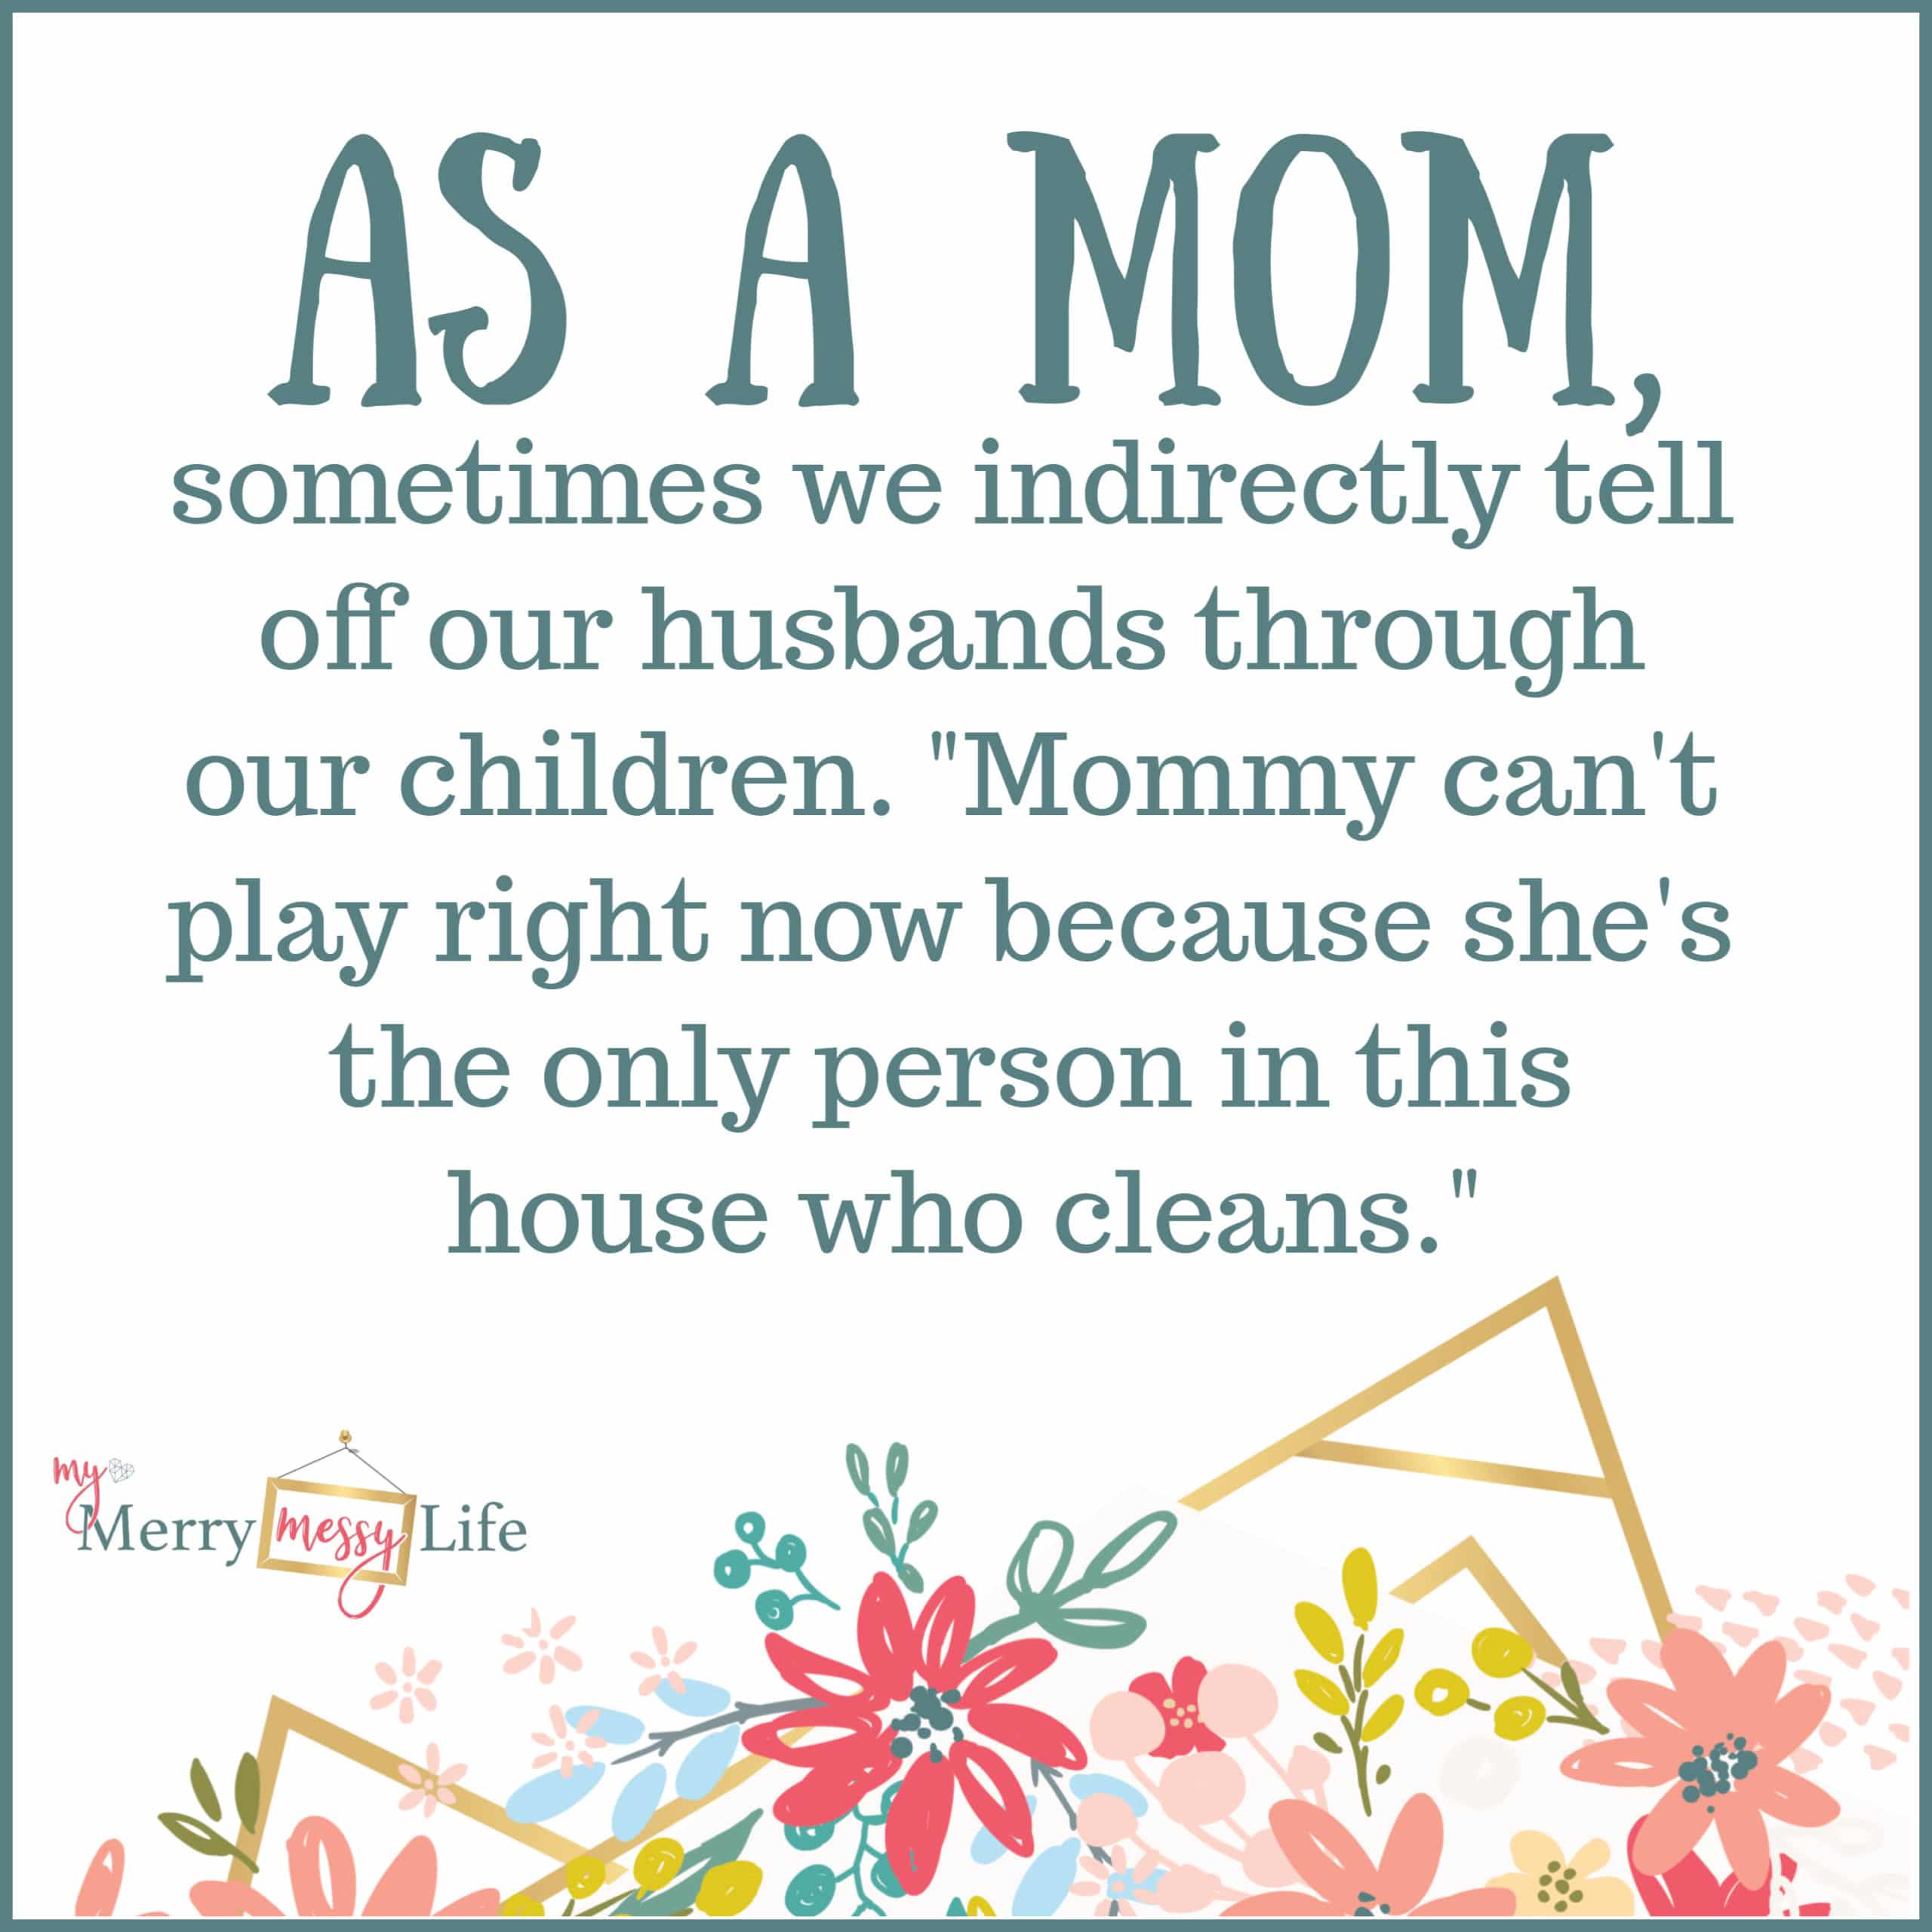 Funny Mom Memes about #momlife